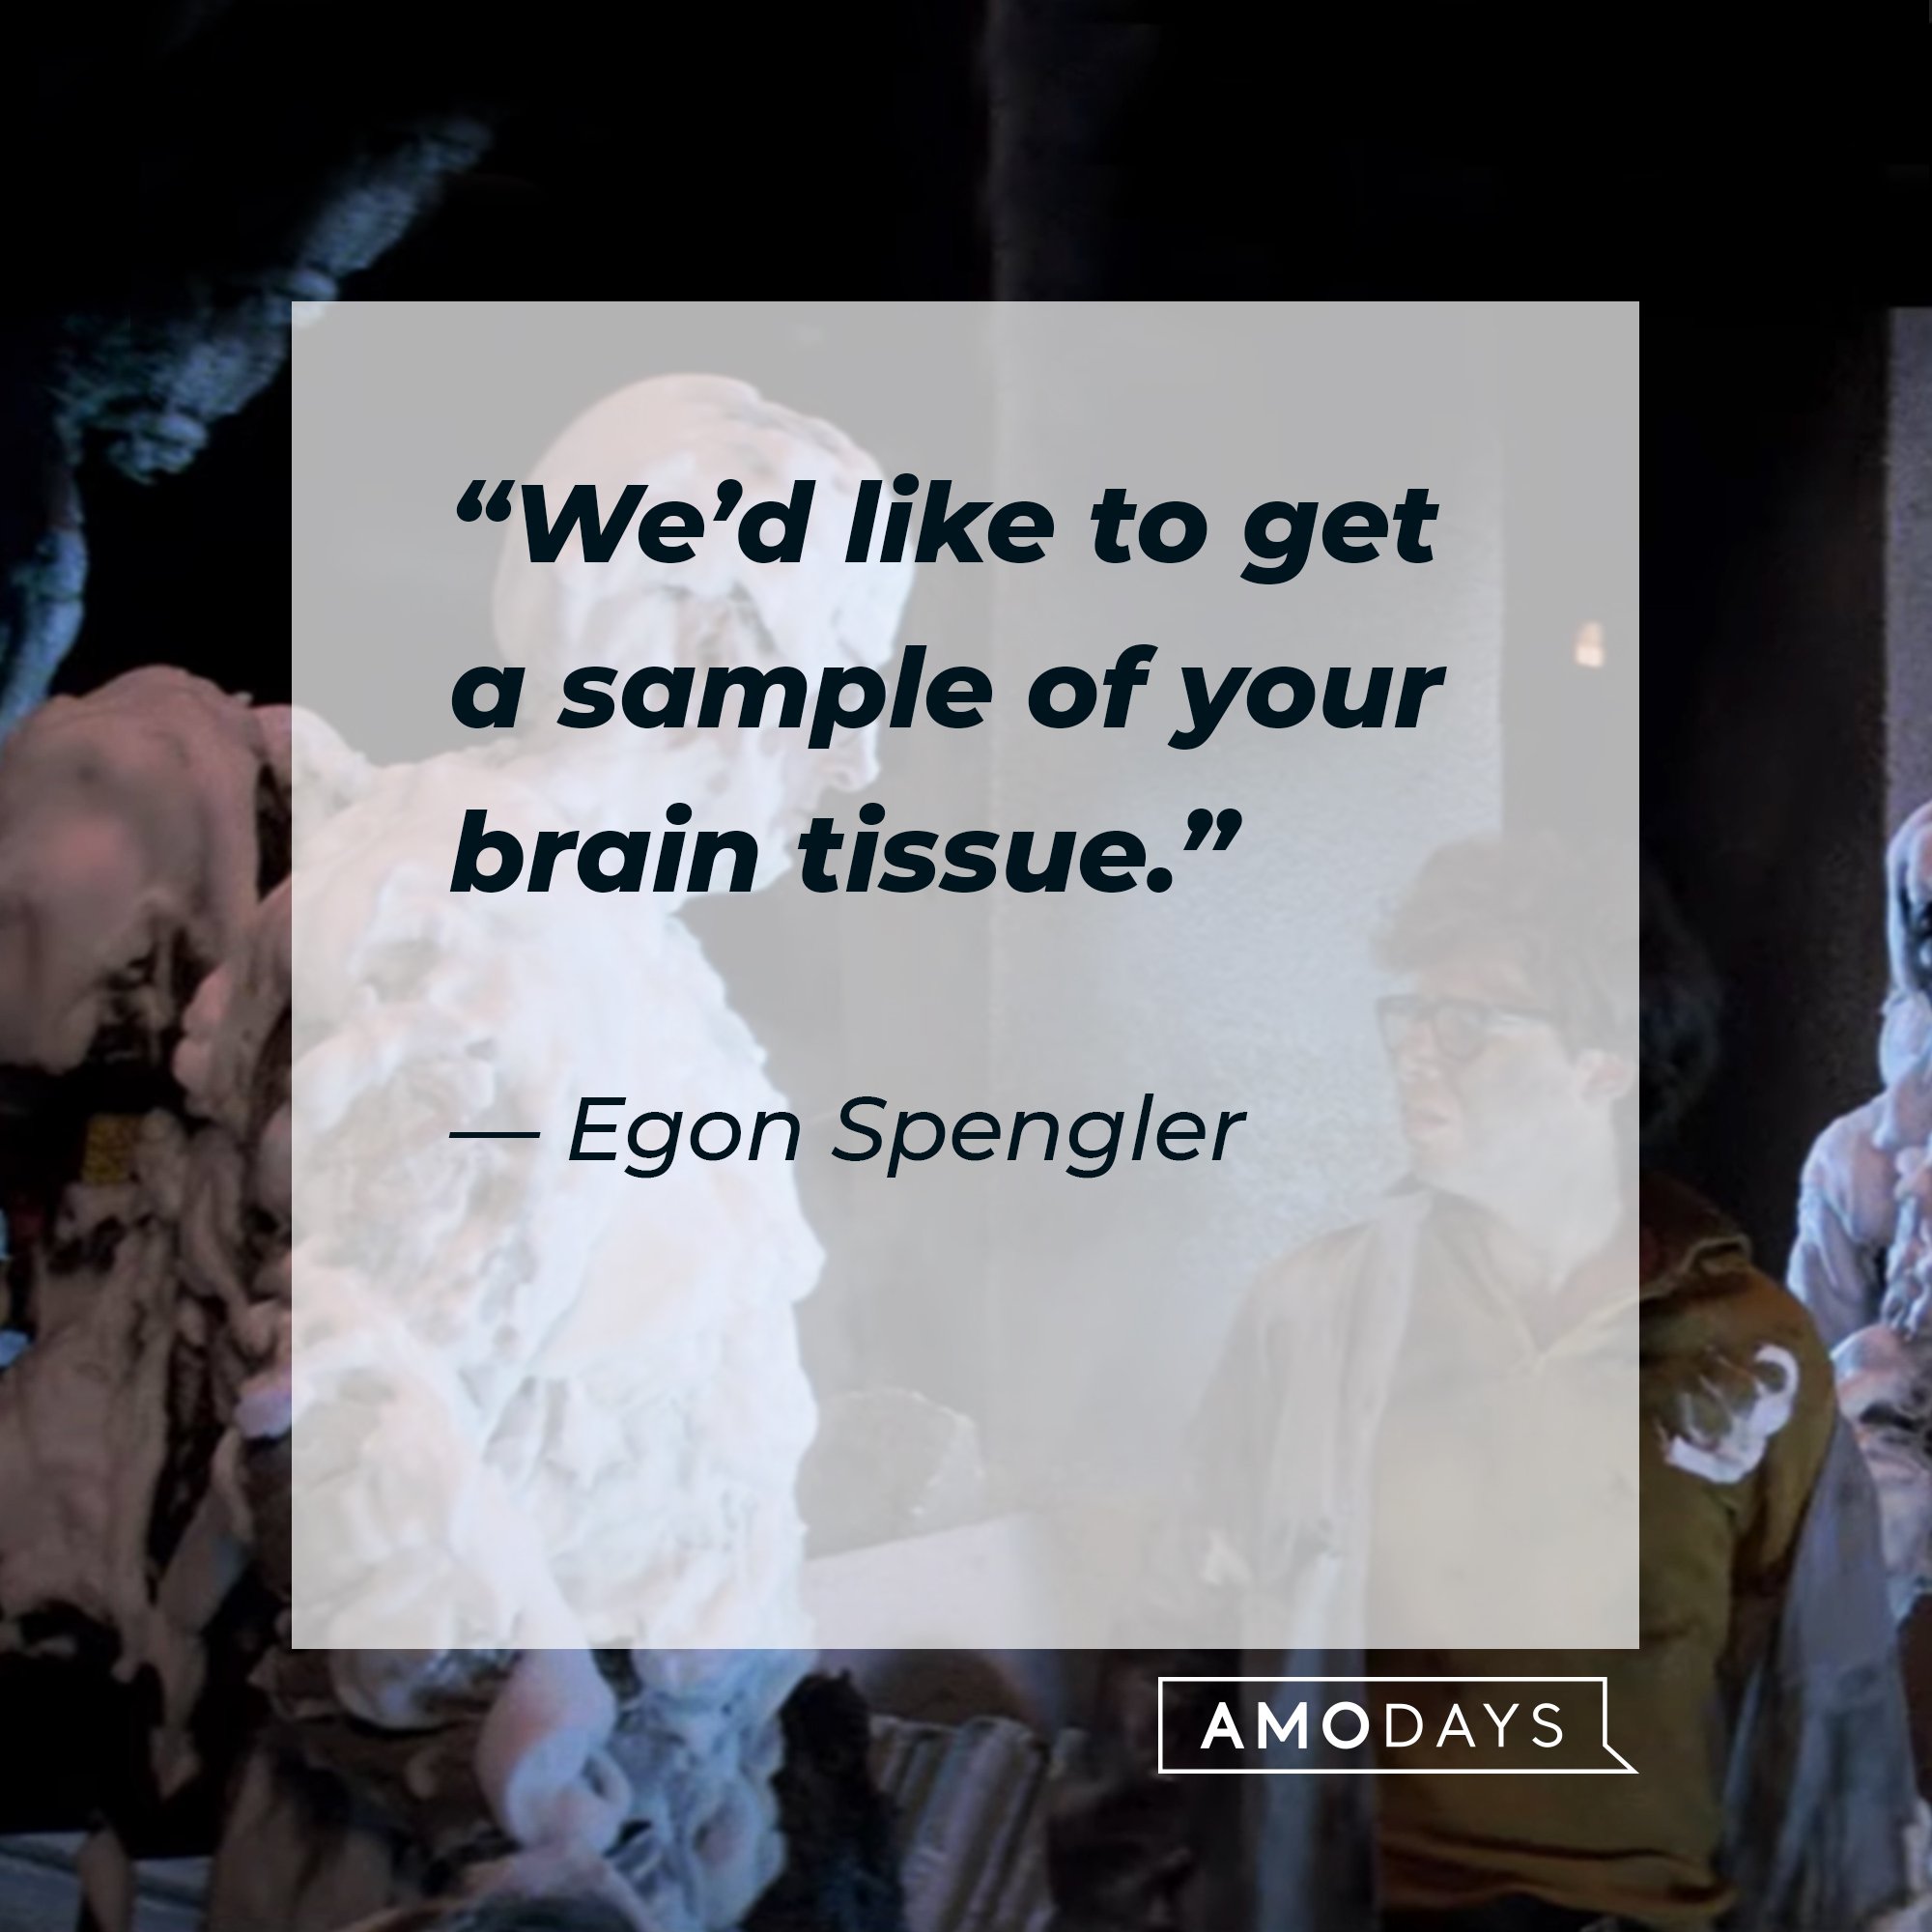 Egon Spengler's quote: “We’d like to get a sample of your brain tissue.” | Image: AmoDays